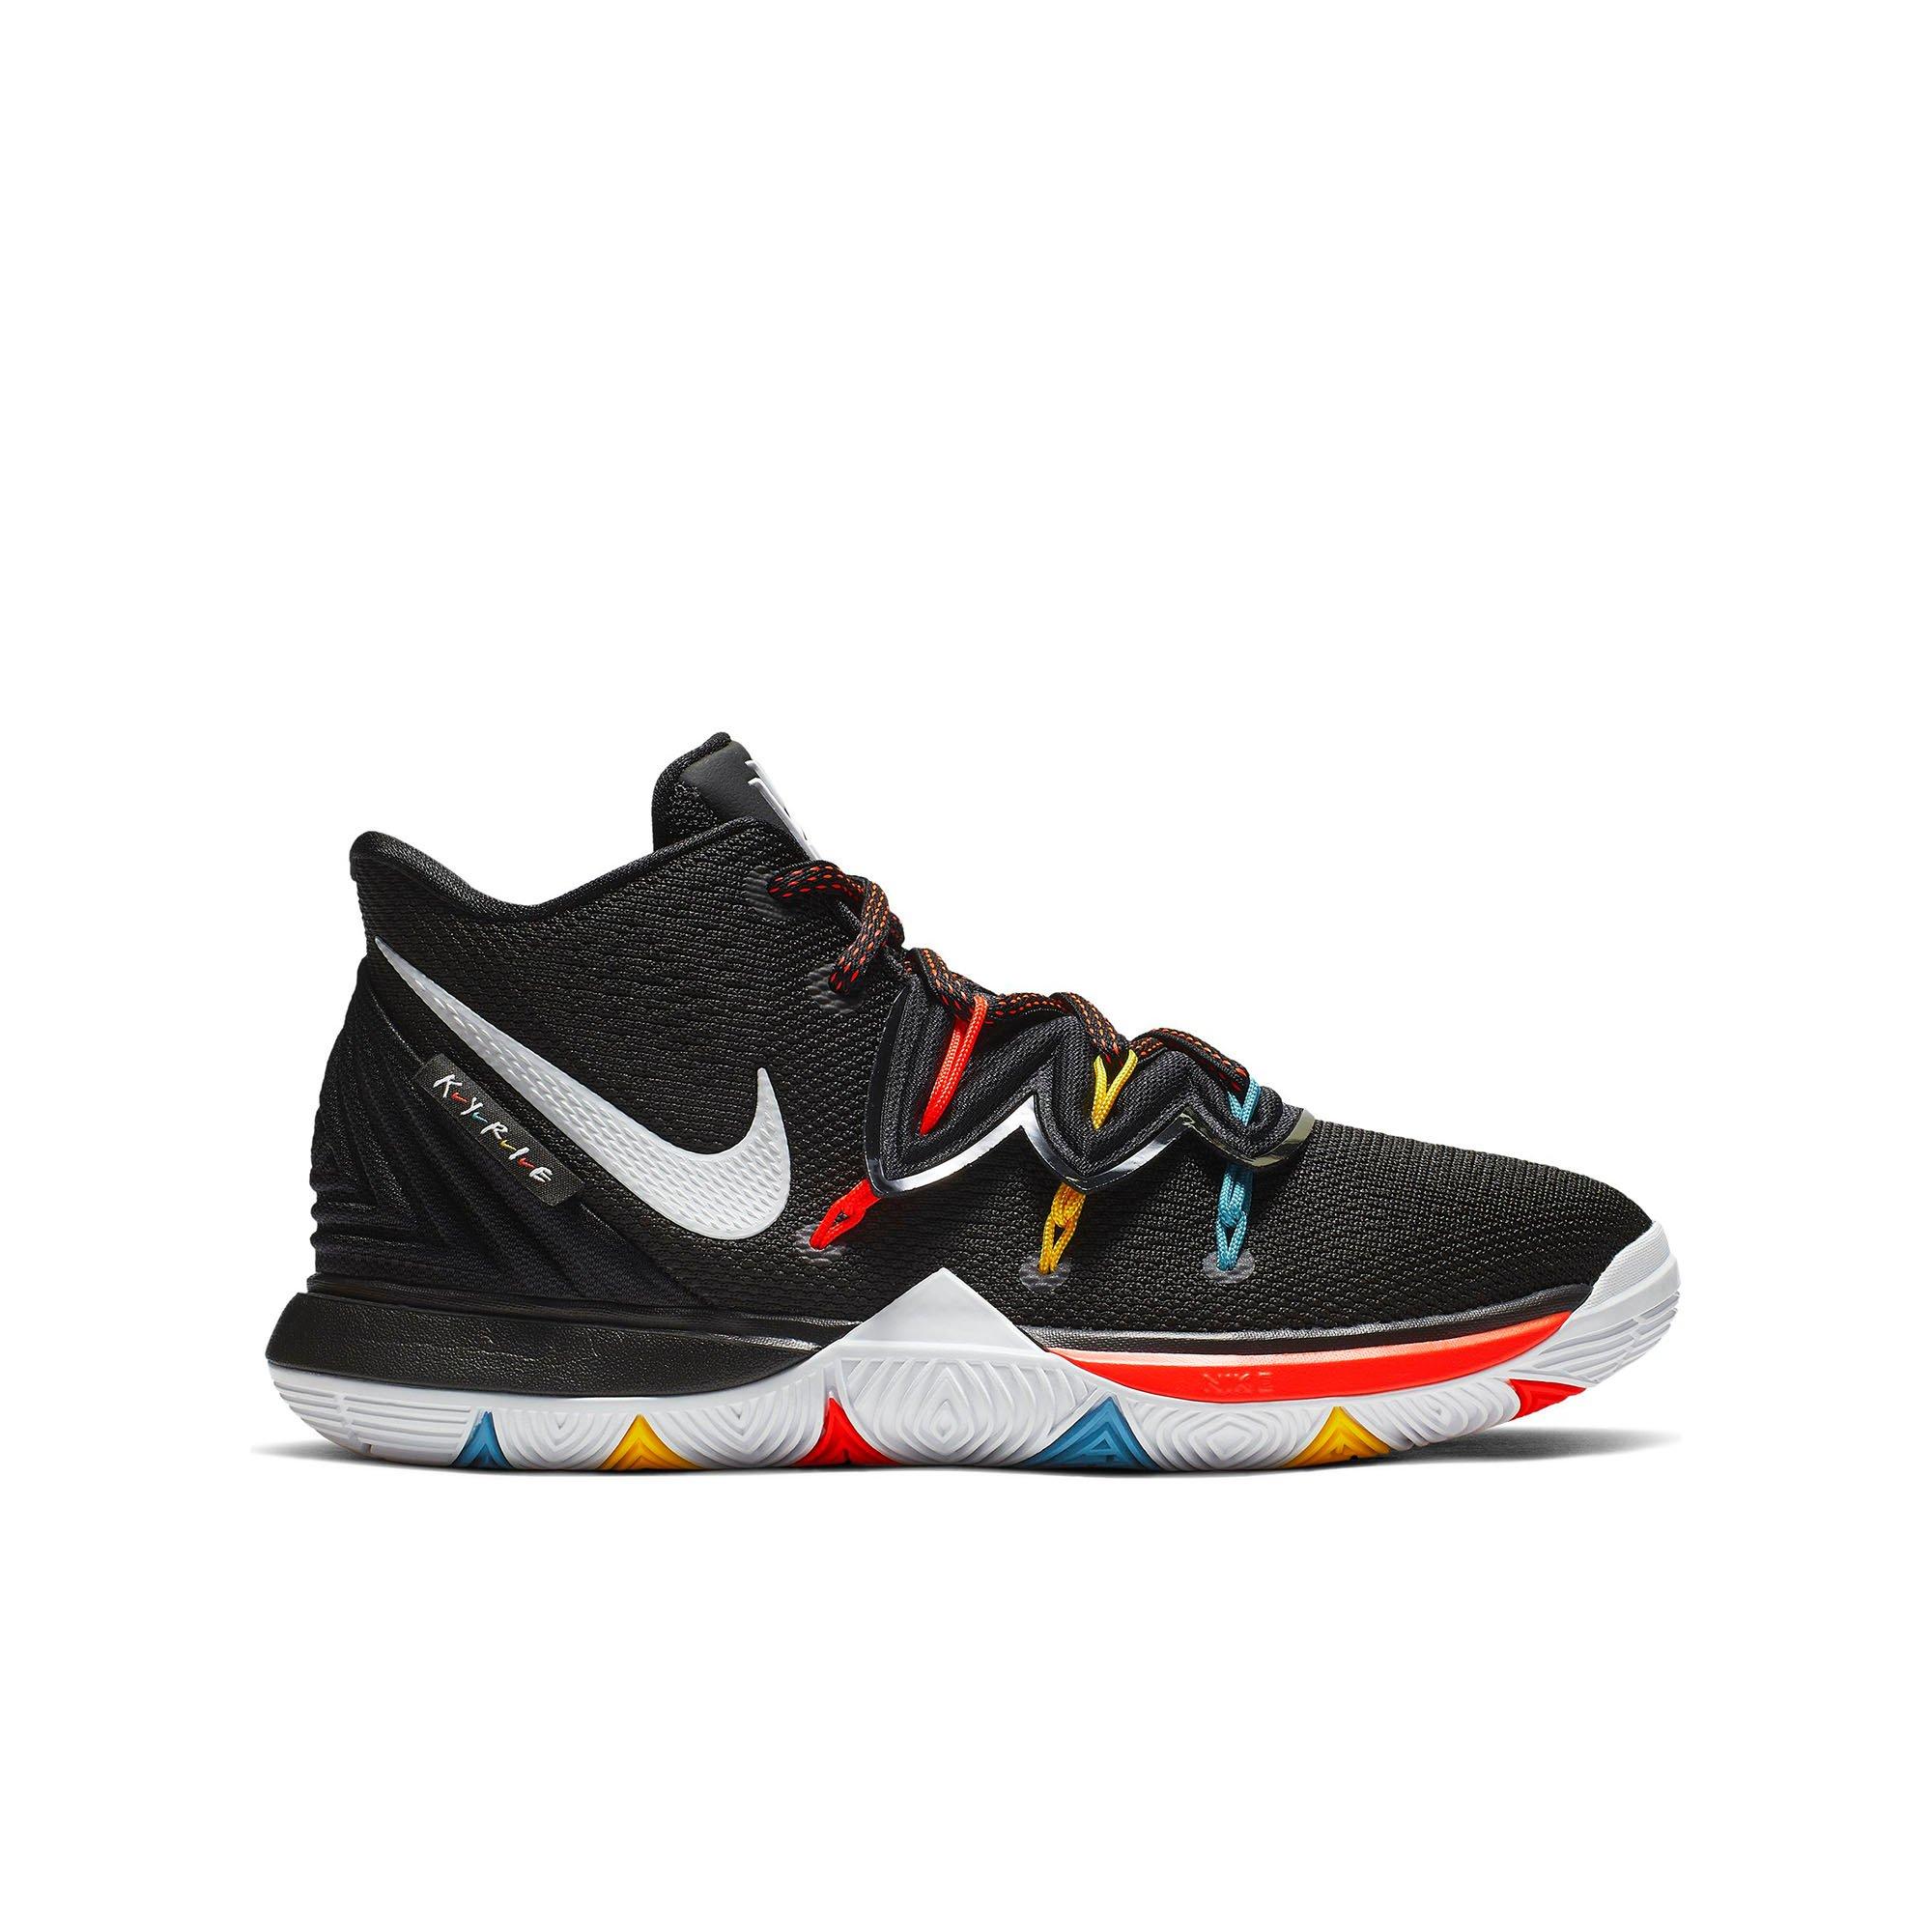 Nike Basketball Shoes Online Discount Kyrie 5 Multicolor Mens